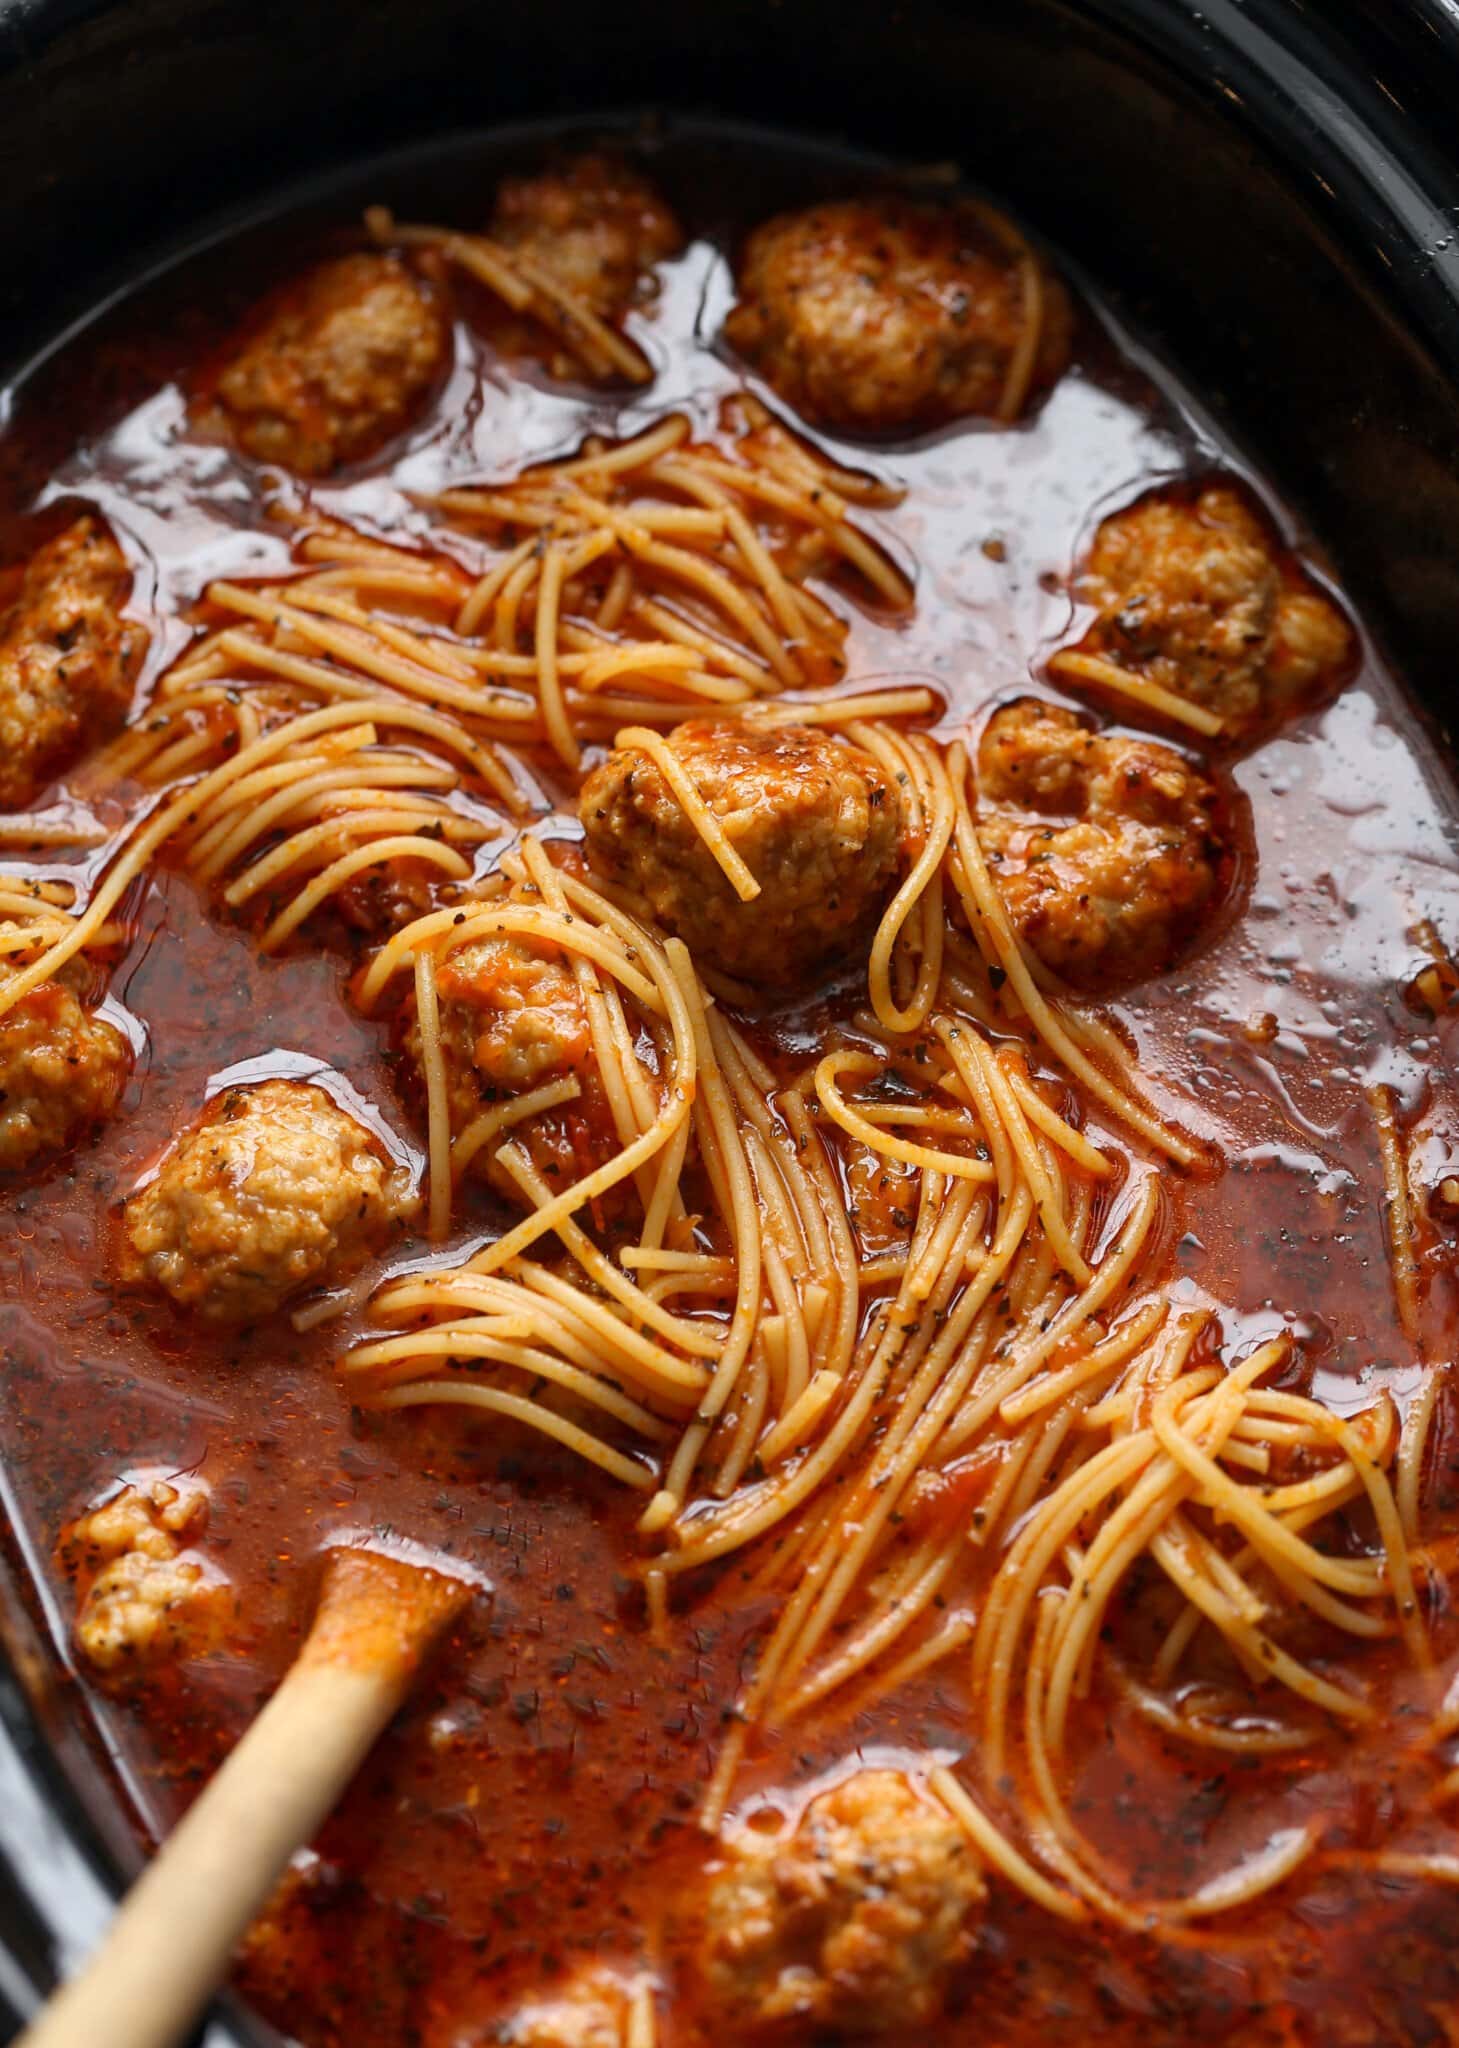 Spaghetti and Meatball Soup - Crock Pot Recipe | Cookies and Cups